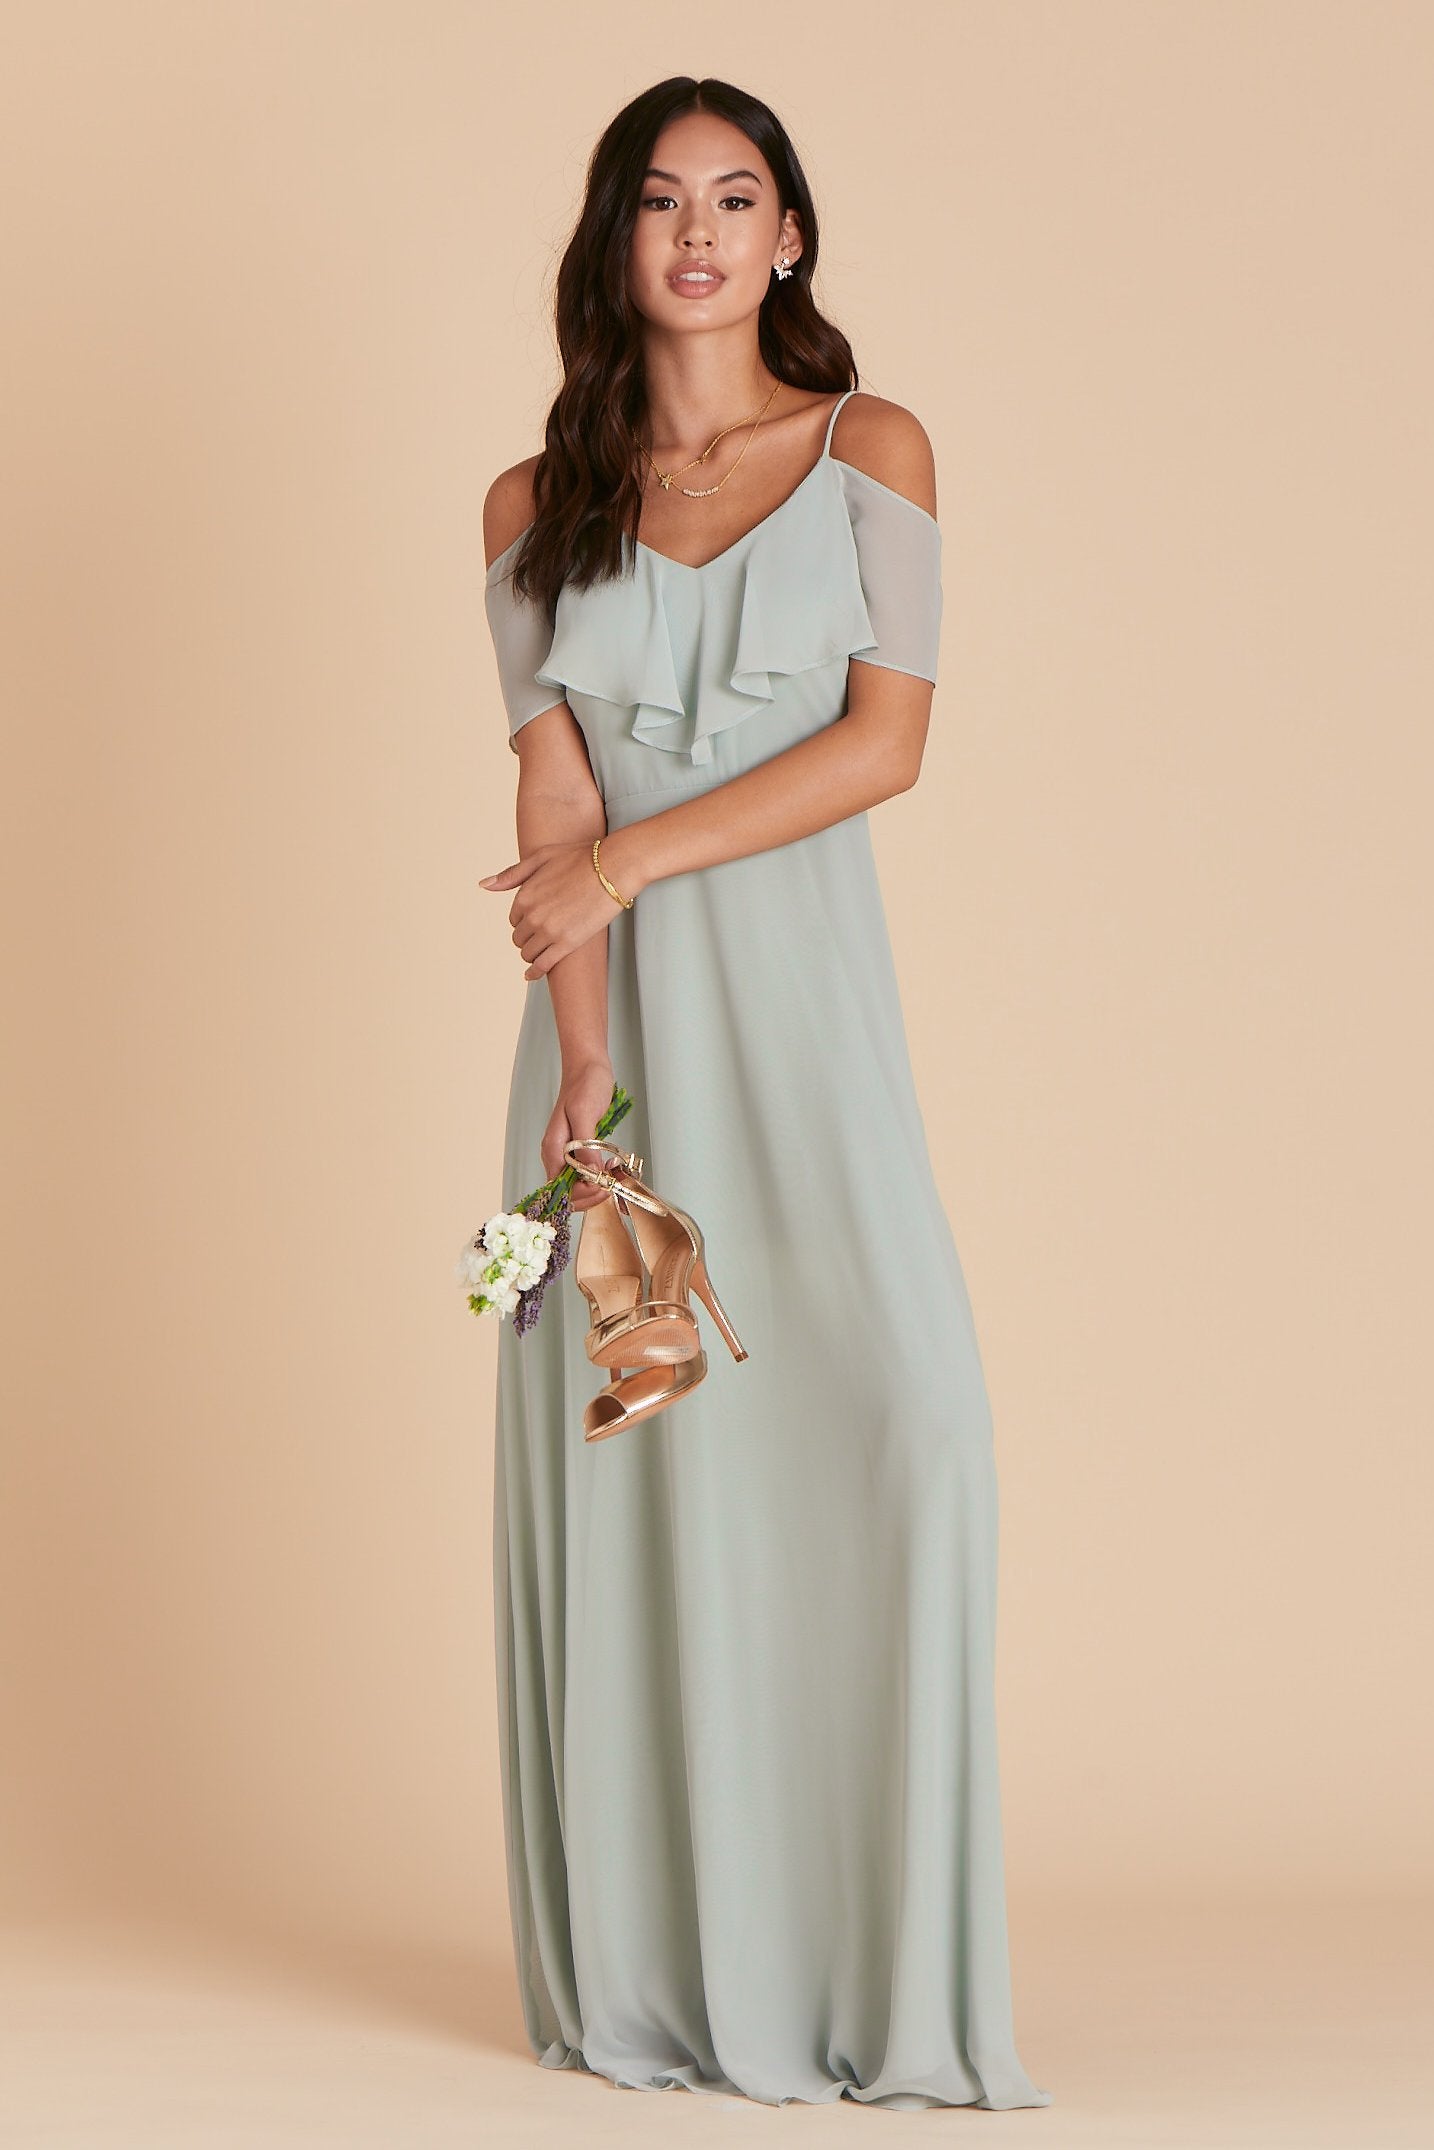 Jane convertible bridesmaid dress in sage green chiffon by Birdy Grey, front view